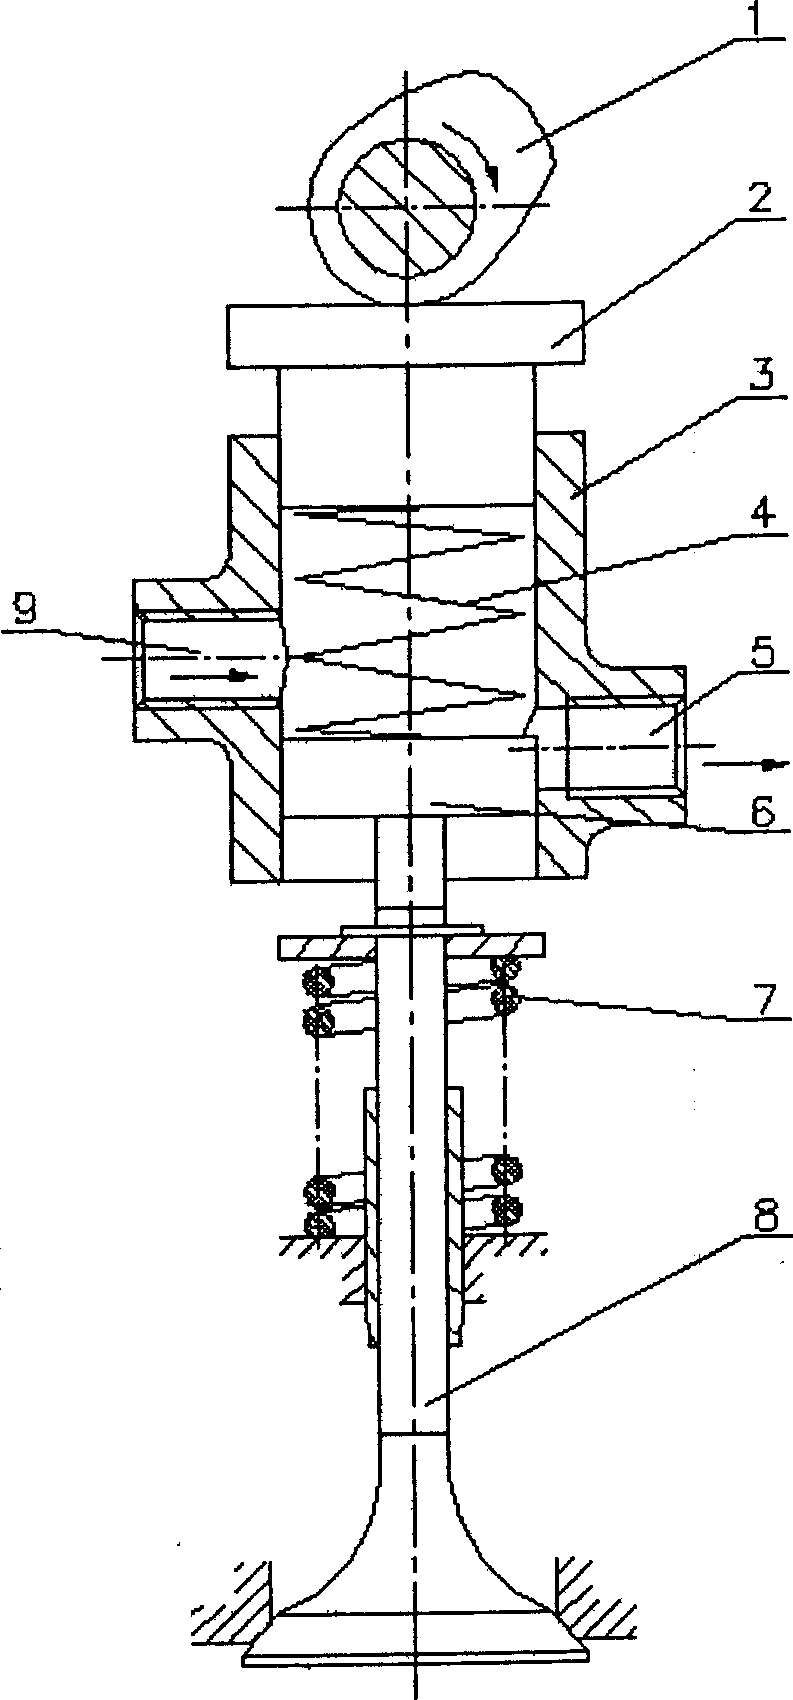 Valve timing continuously variable internal combustion engine valve system